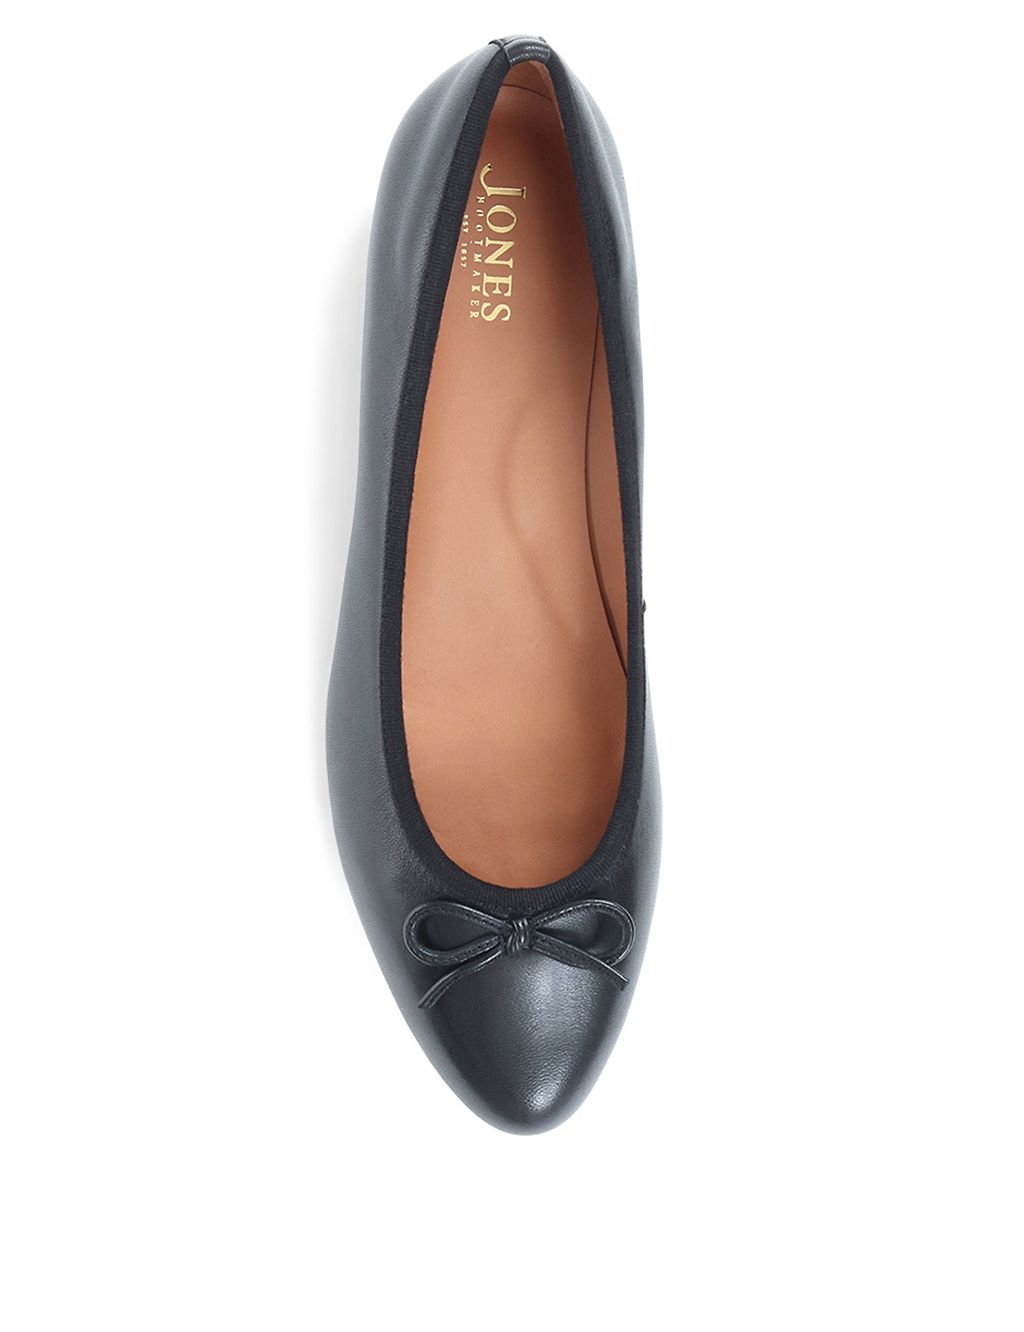 Leather Flat Ballet Pumps 6 of 7